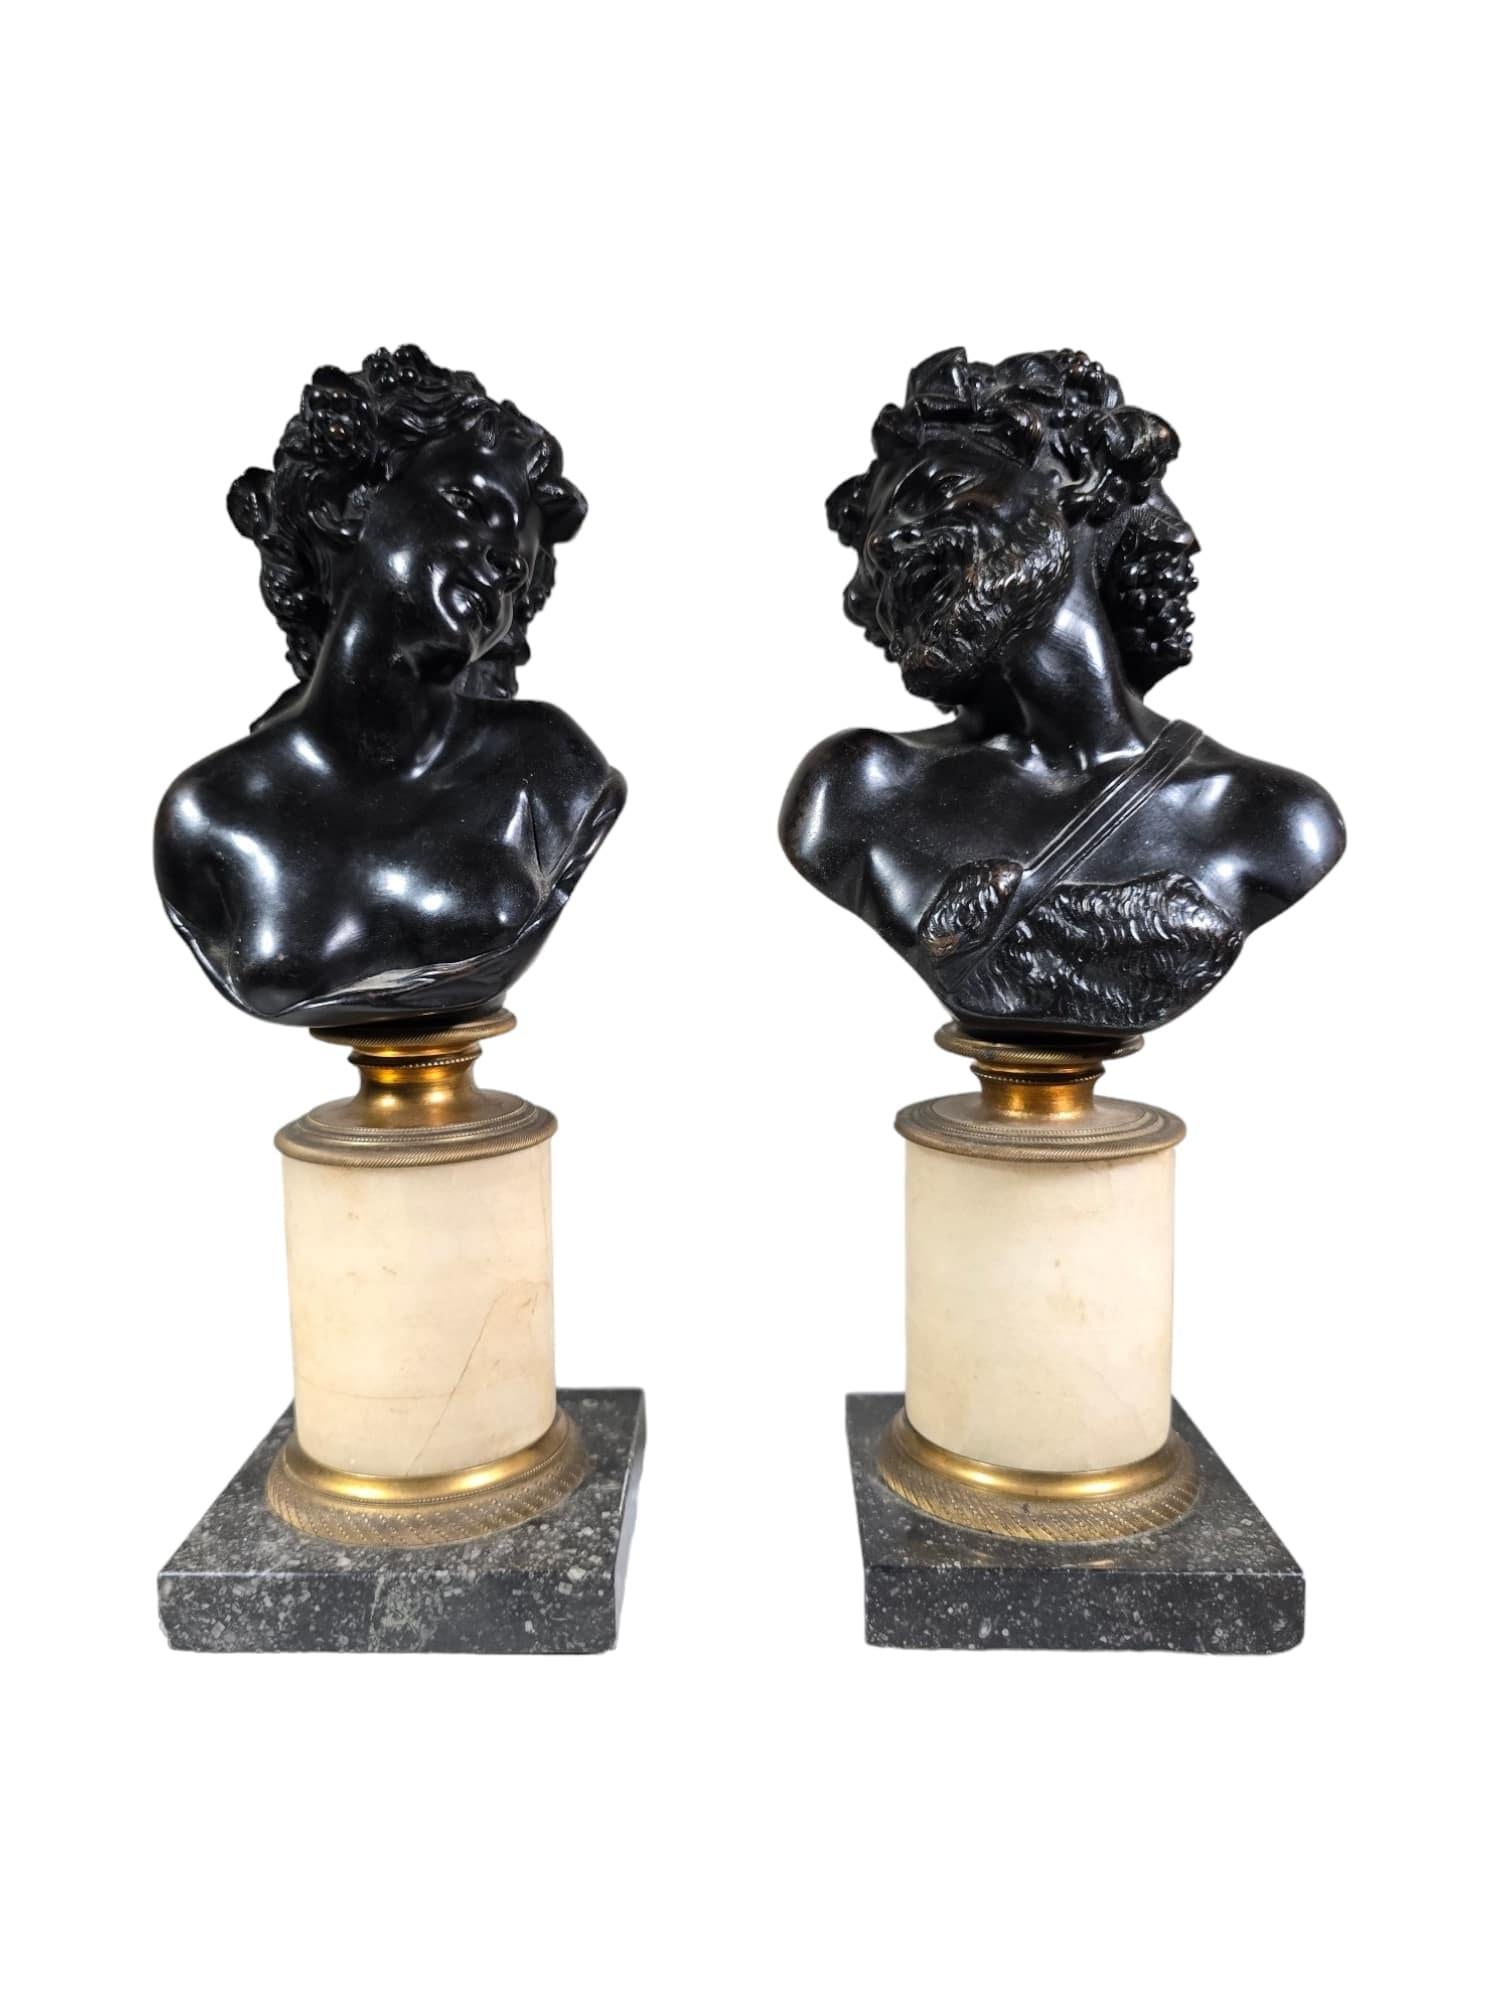 This exquisite pair of antique Italian bronze busts represents the timeless allure of the Grand Tour era, featuring depictions of Dionysus and Ariadne inspired by the renowned sculptor Clodion. Dating back to the 19th century, these busts are a